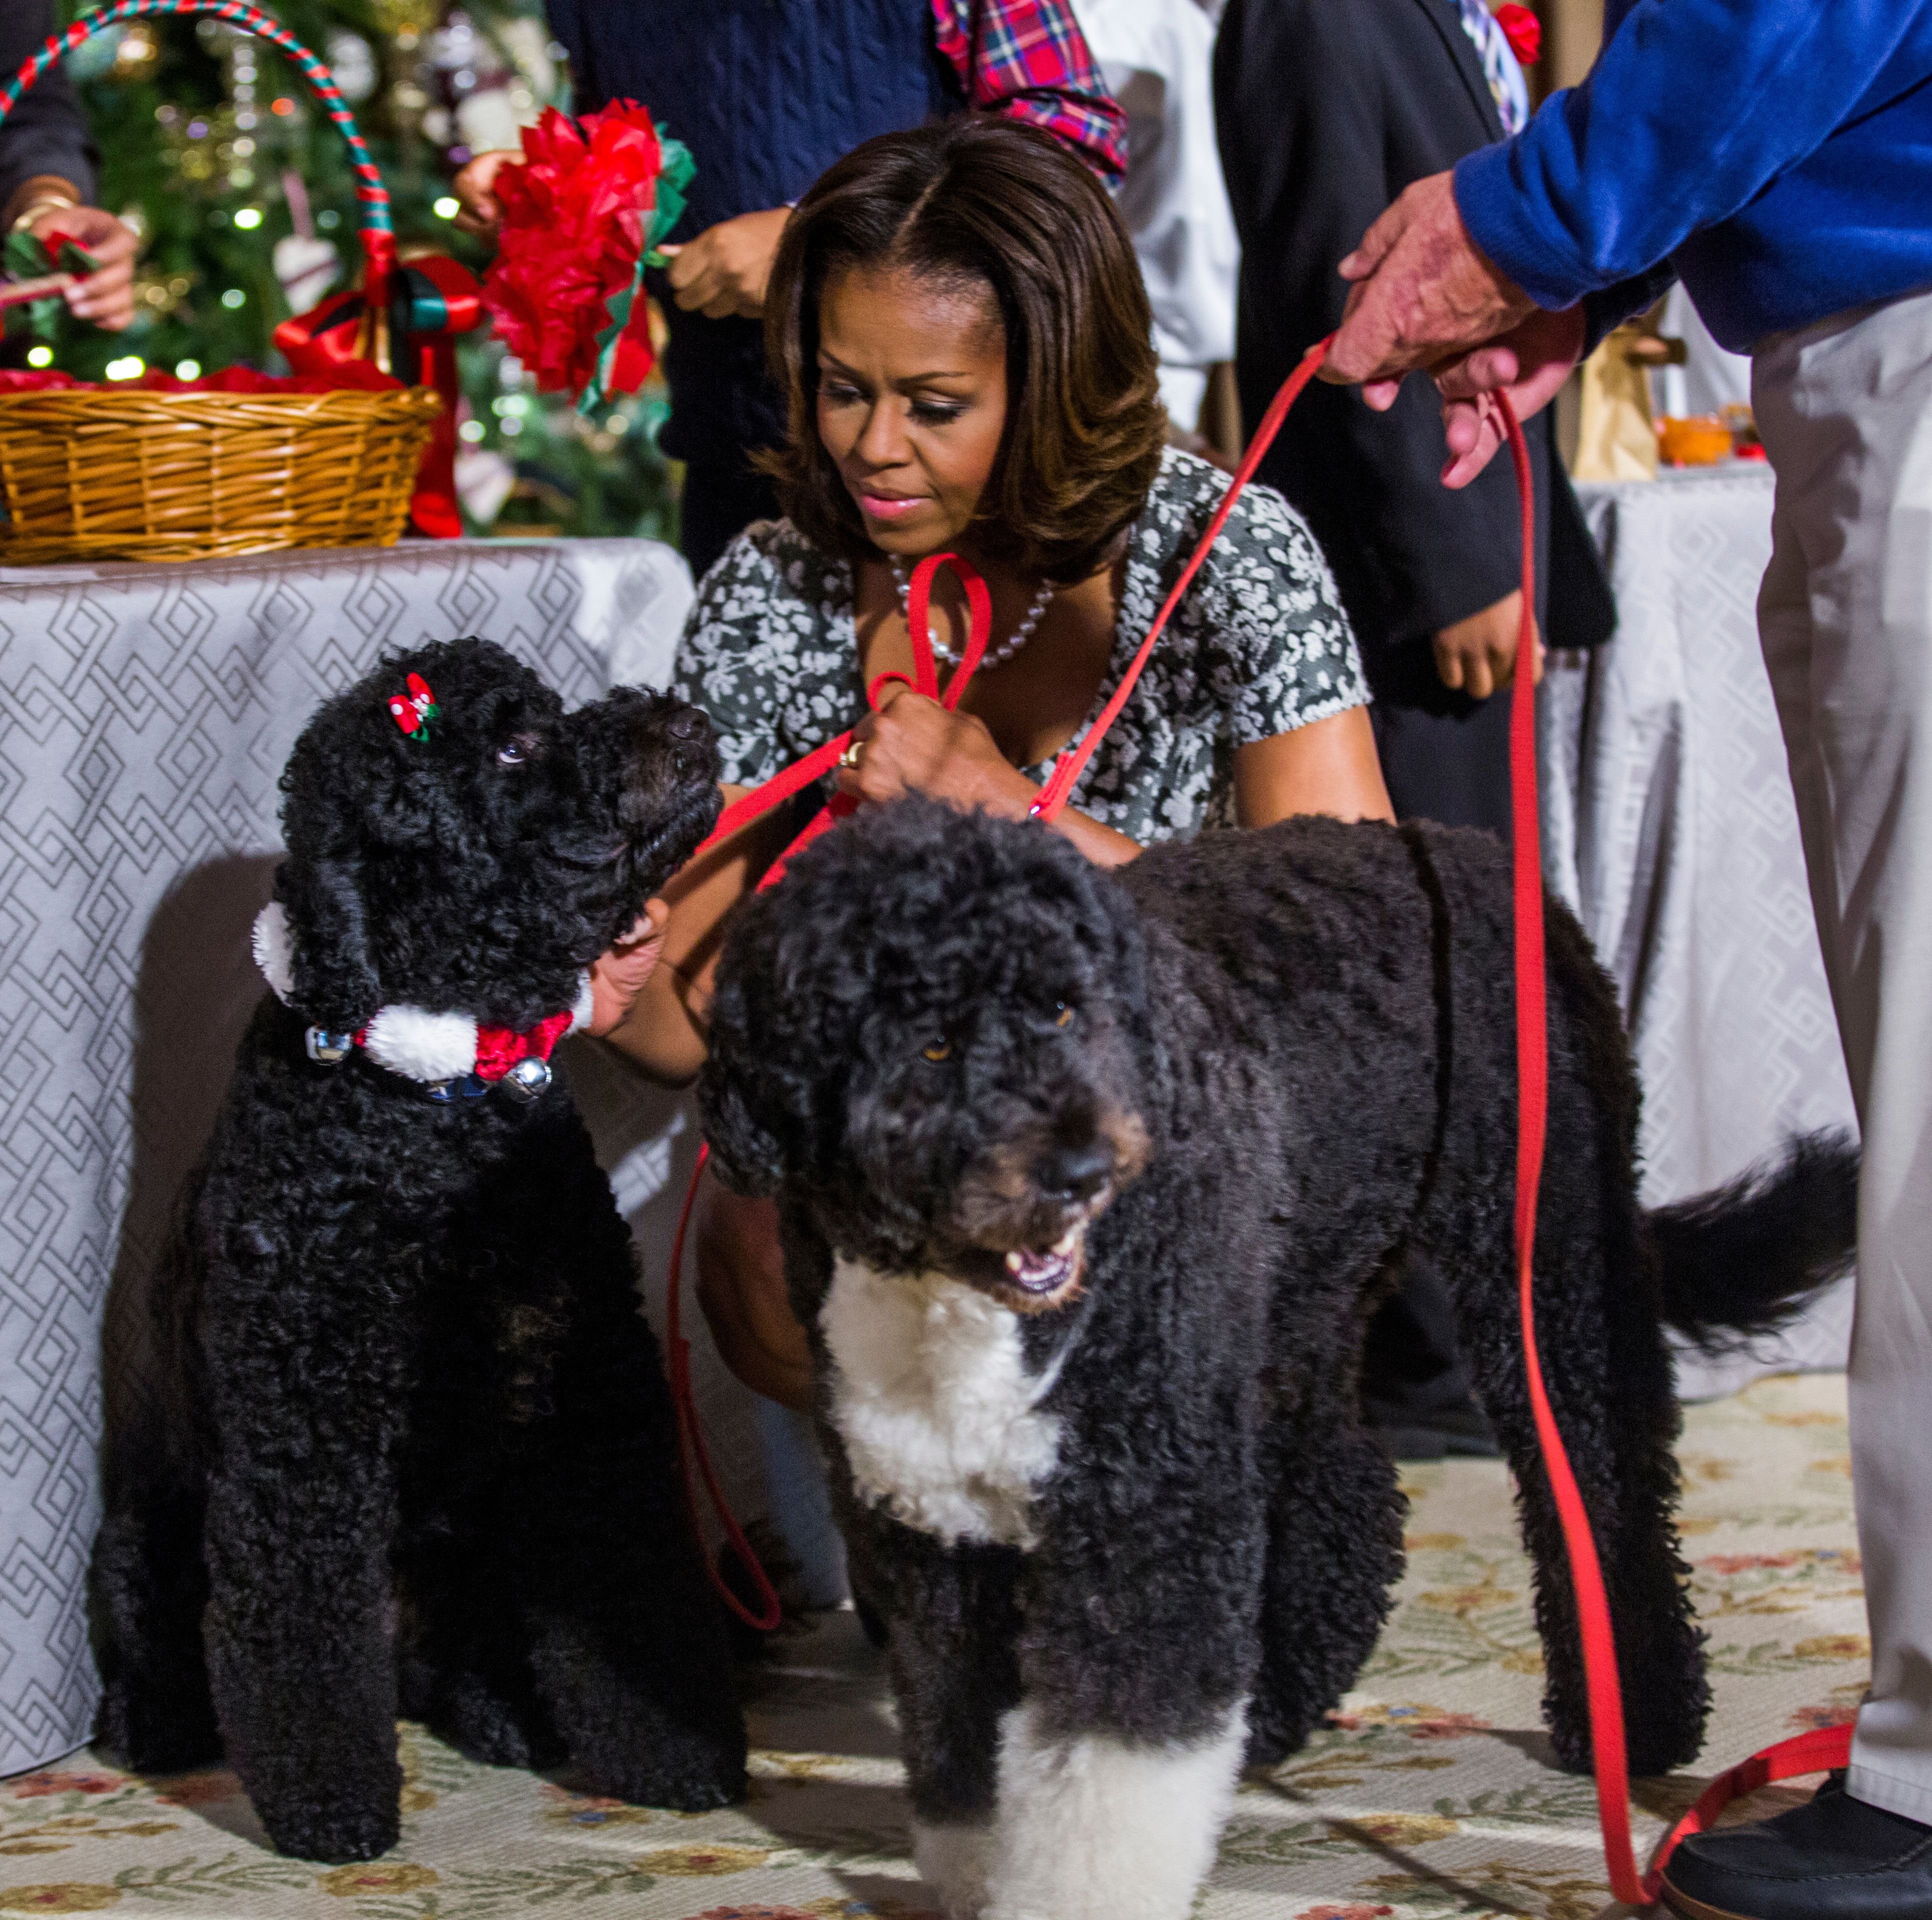 US First Lady Michelle Obama with the family dogs Sunny (L) and Bo (R) during an event to preview the holiday decorations at the White House in Washington, DC. (Photo by Brooks Kraft LLC/Corbis via Getty Images)